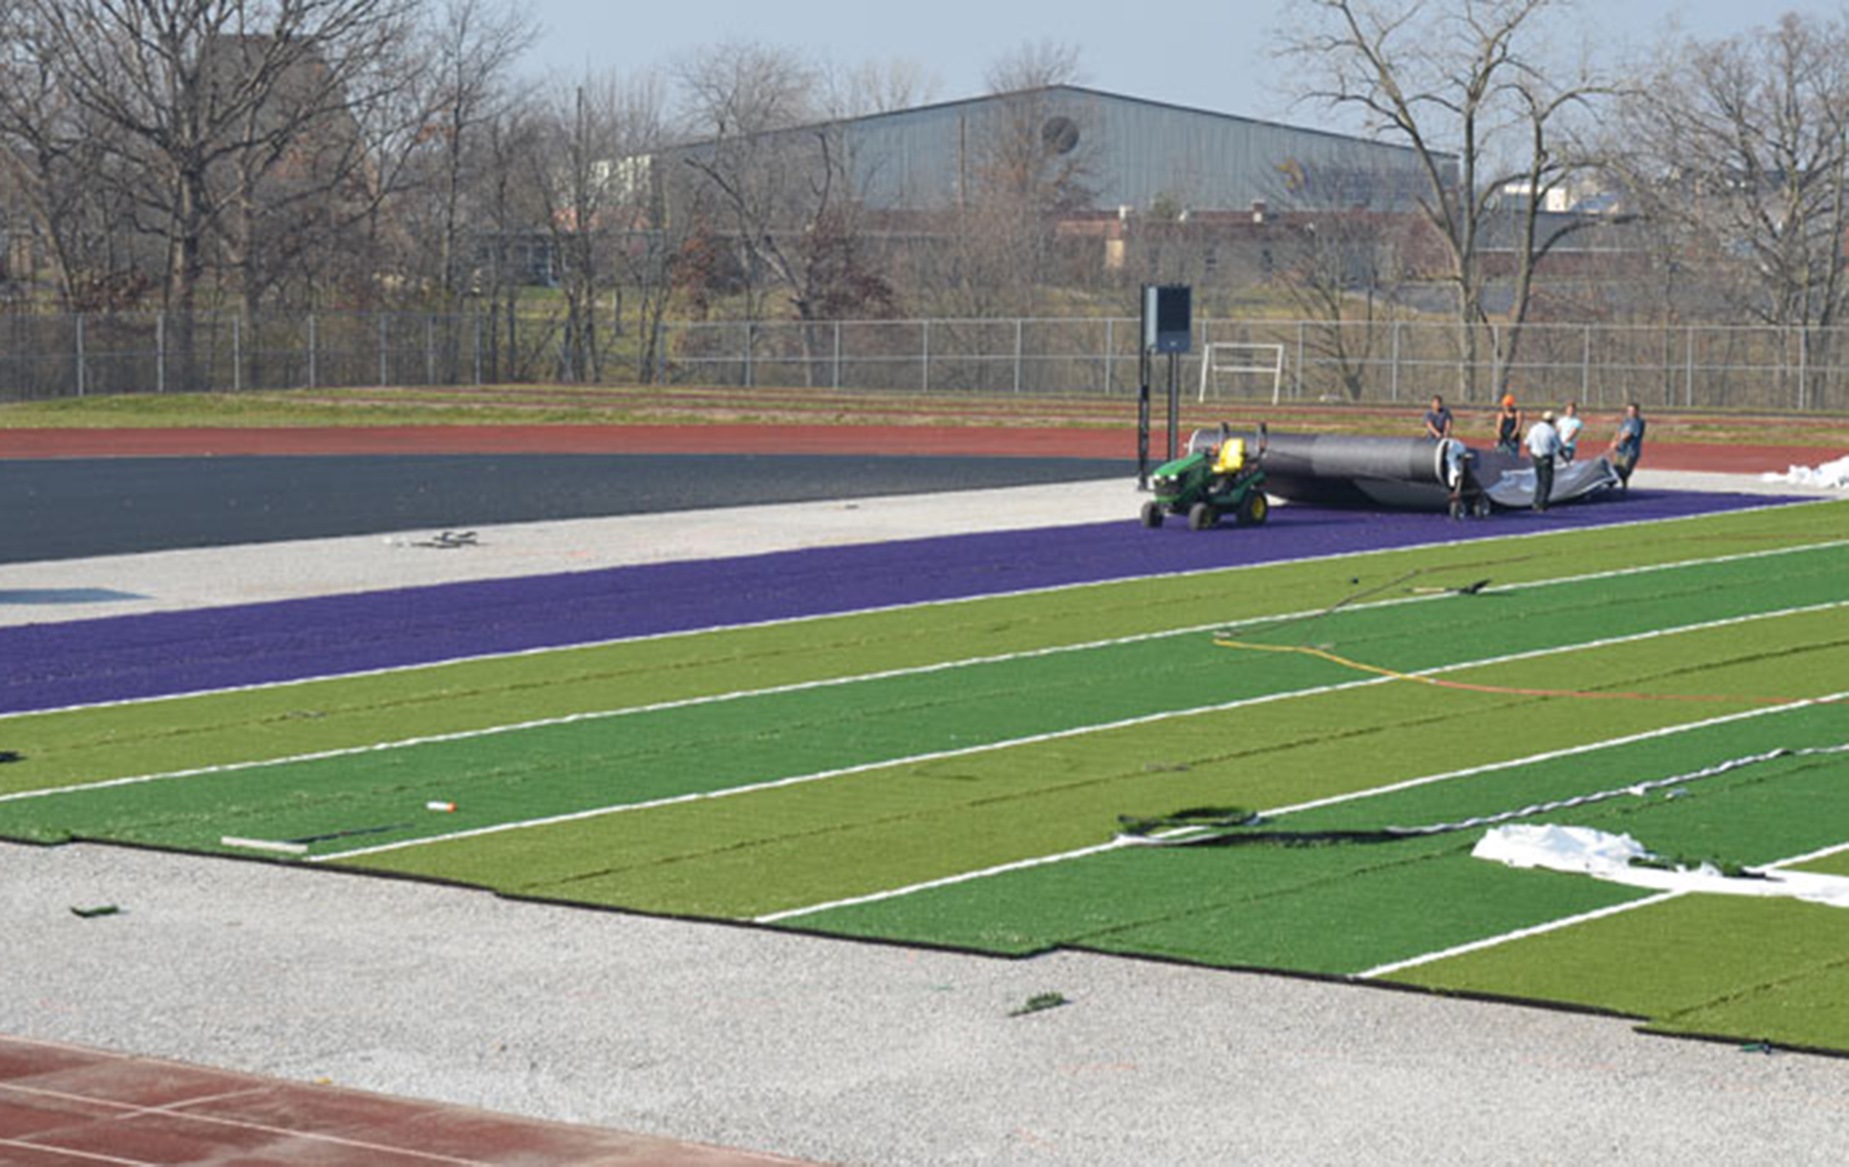 Turf Project Nears Completion at Coressel Stadium